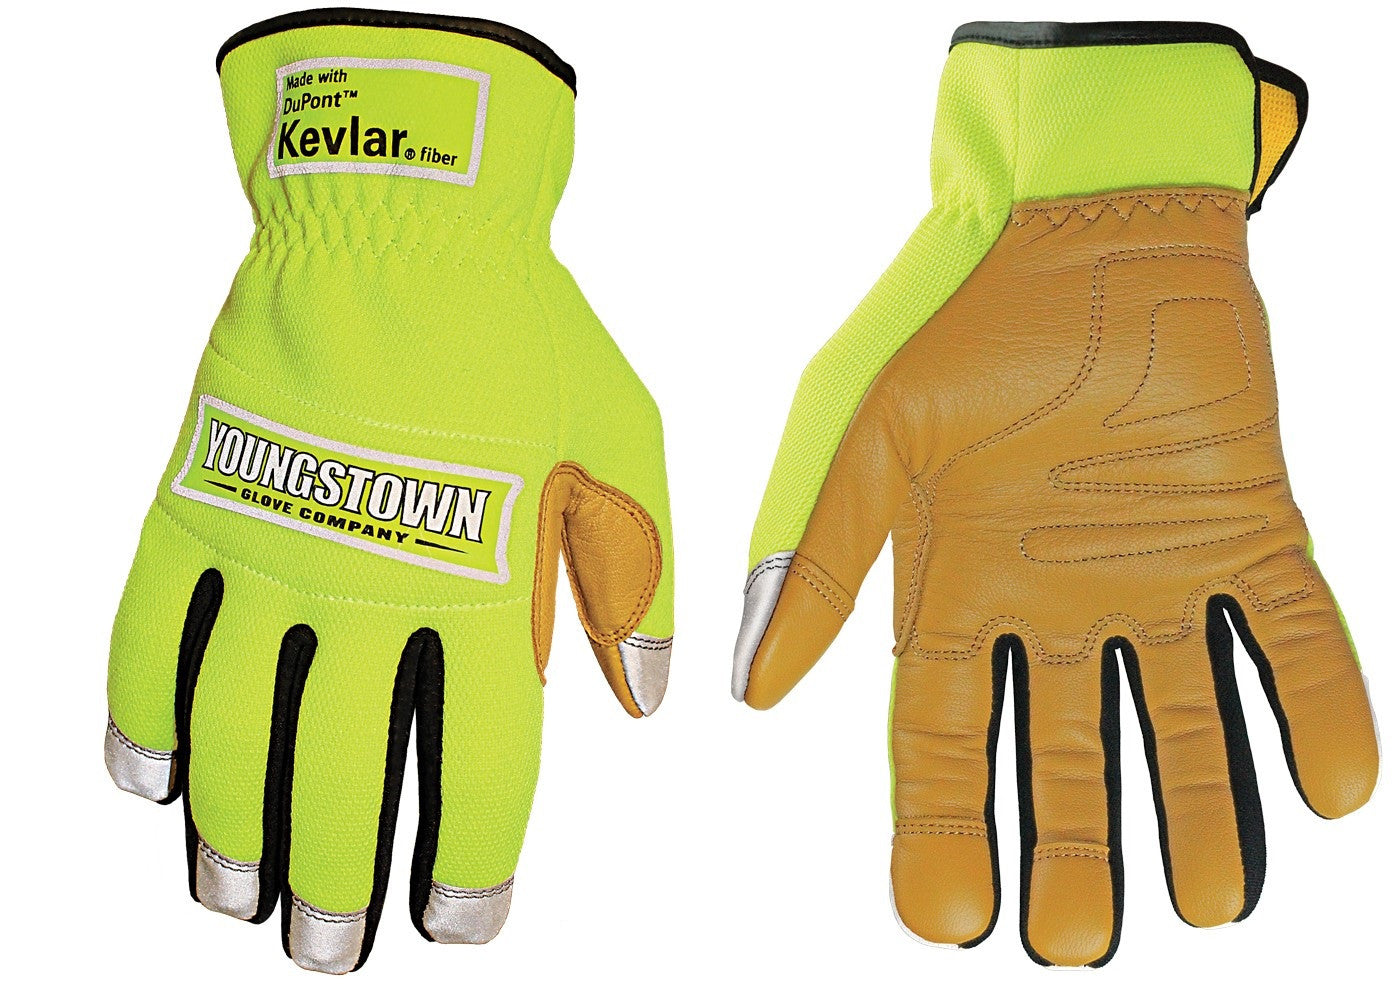 Get High Visibility Reflective Work Gloves